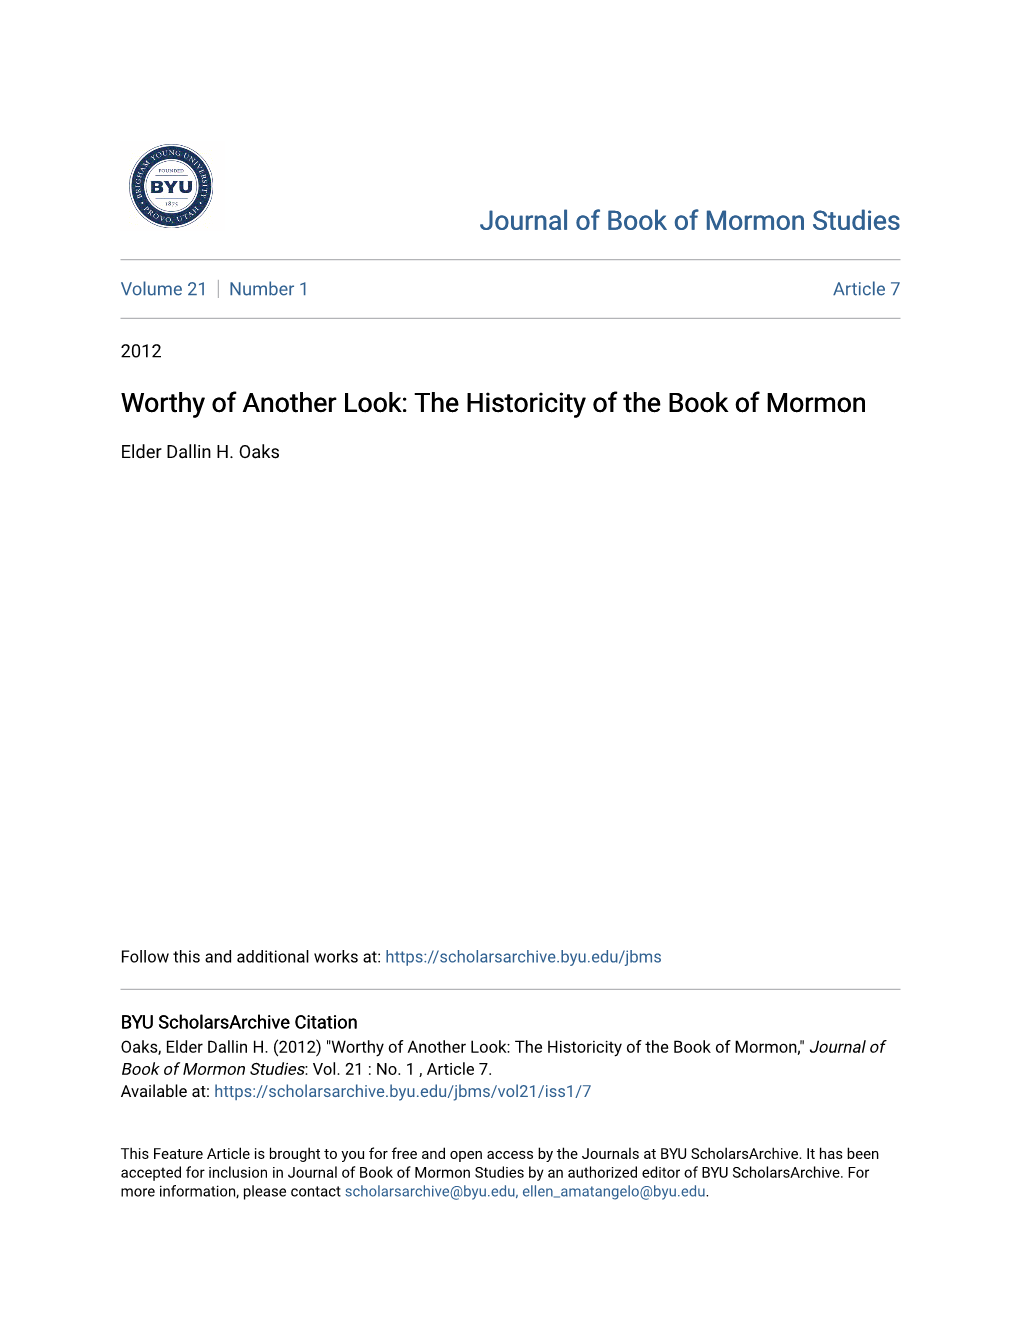 Worthy of Another Look: the Historicity of the Book of Mormon